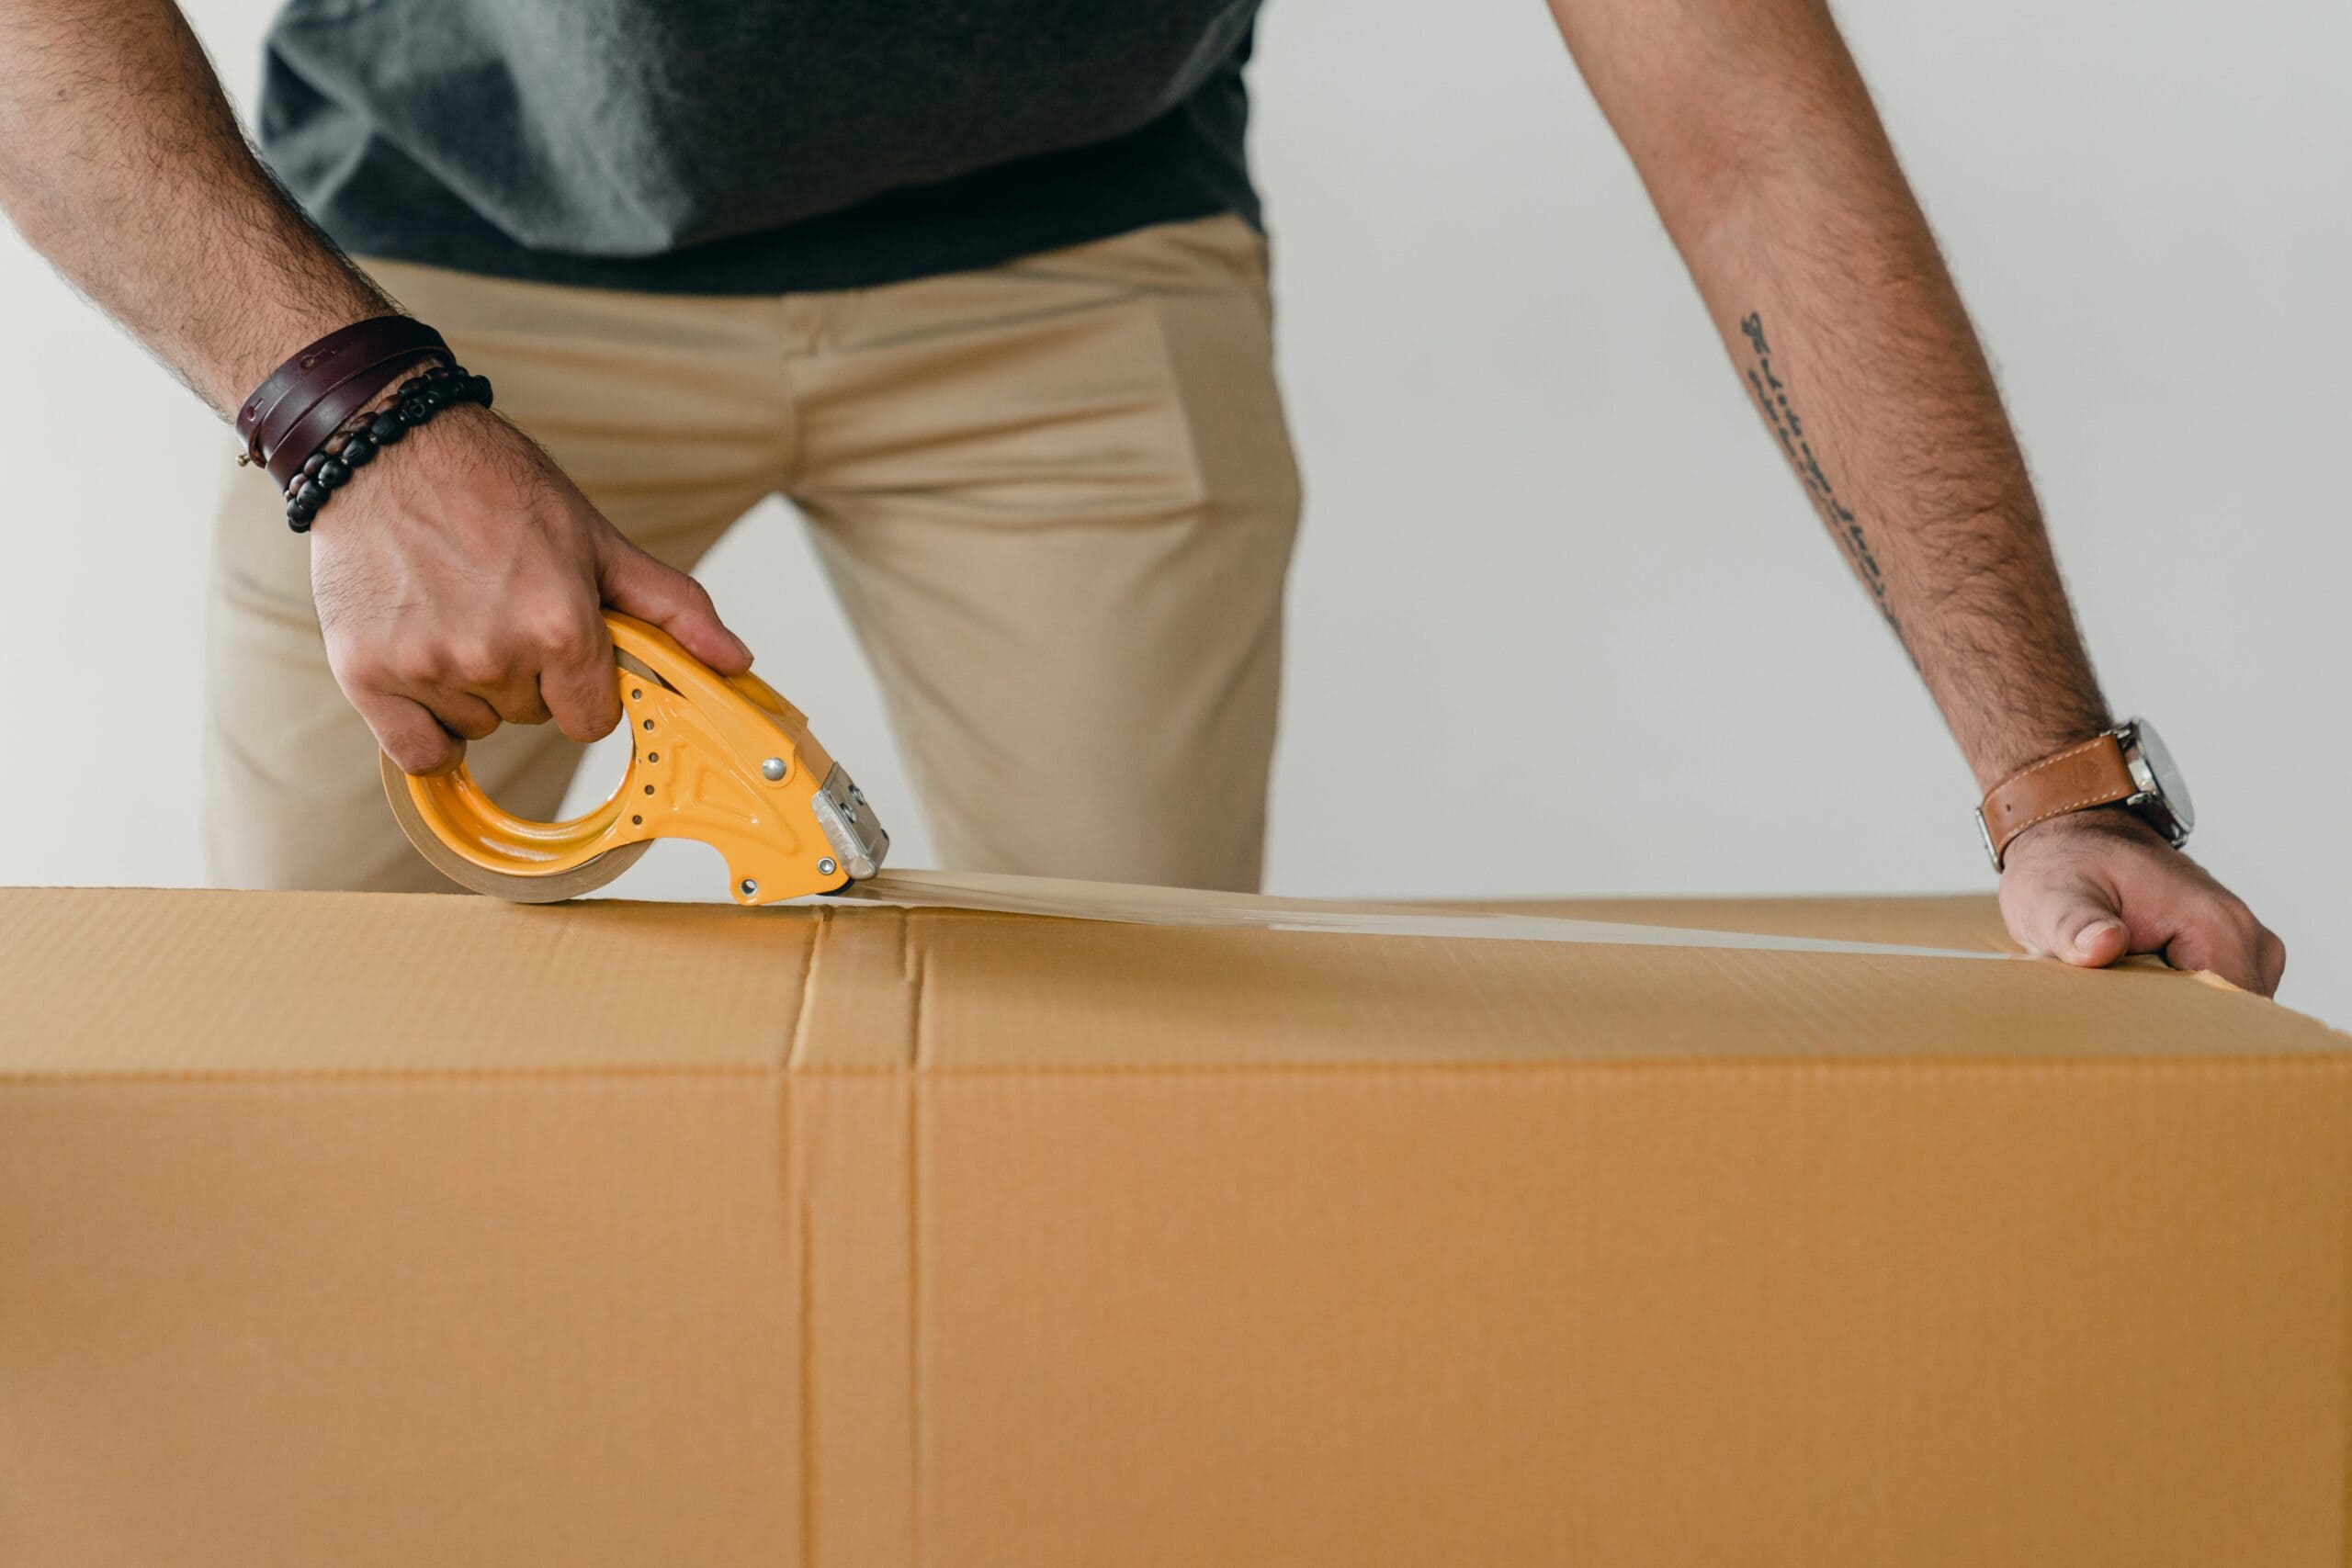 Oversize Shipping: Carrier Rules, Dimensions, Weights, and How to Ship Oversized Items